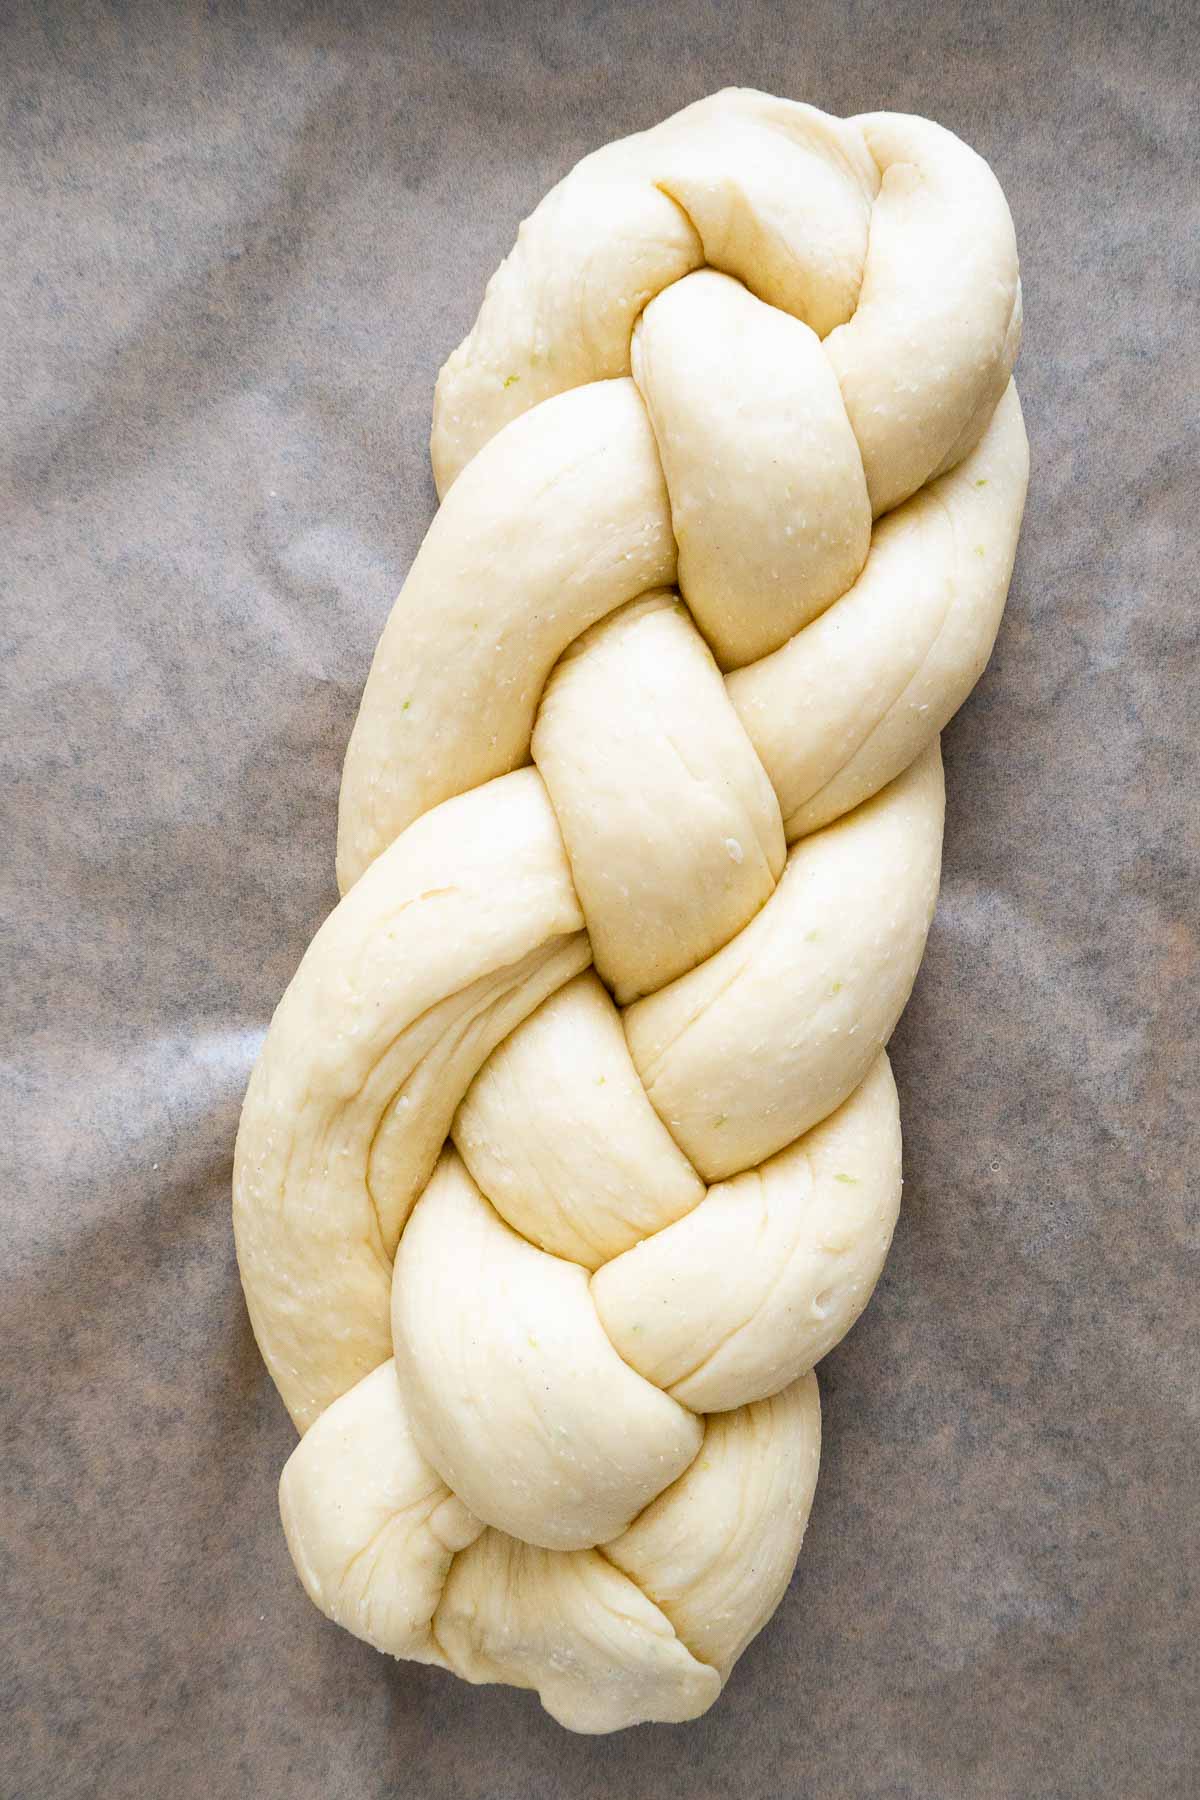 A Hefezopf before baking on parchment paper.